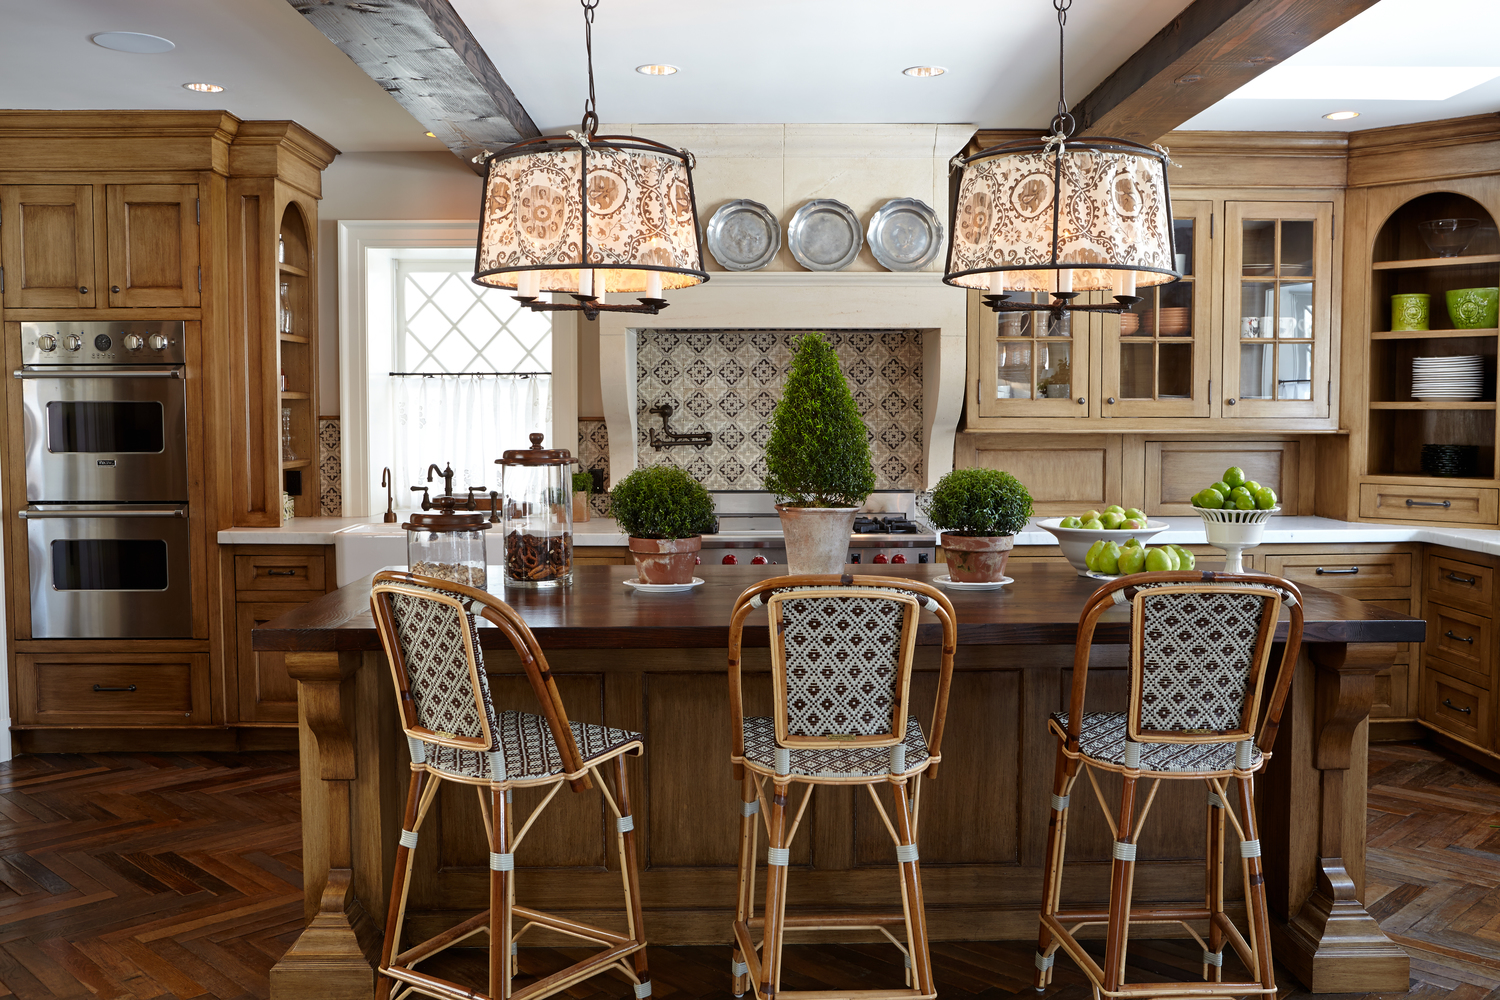 The Enchanted Home Kitchen and Dining Design